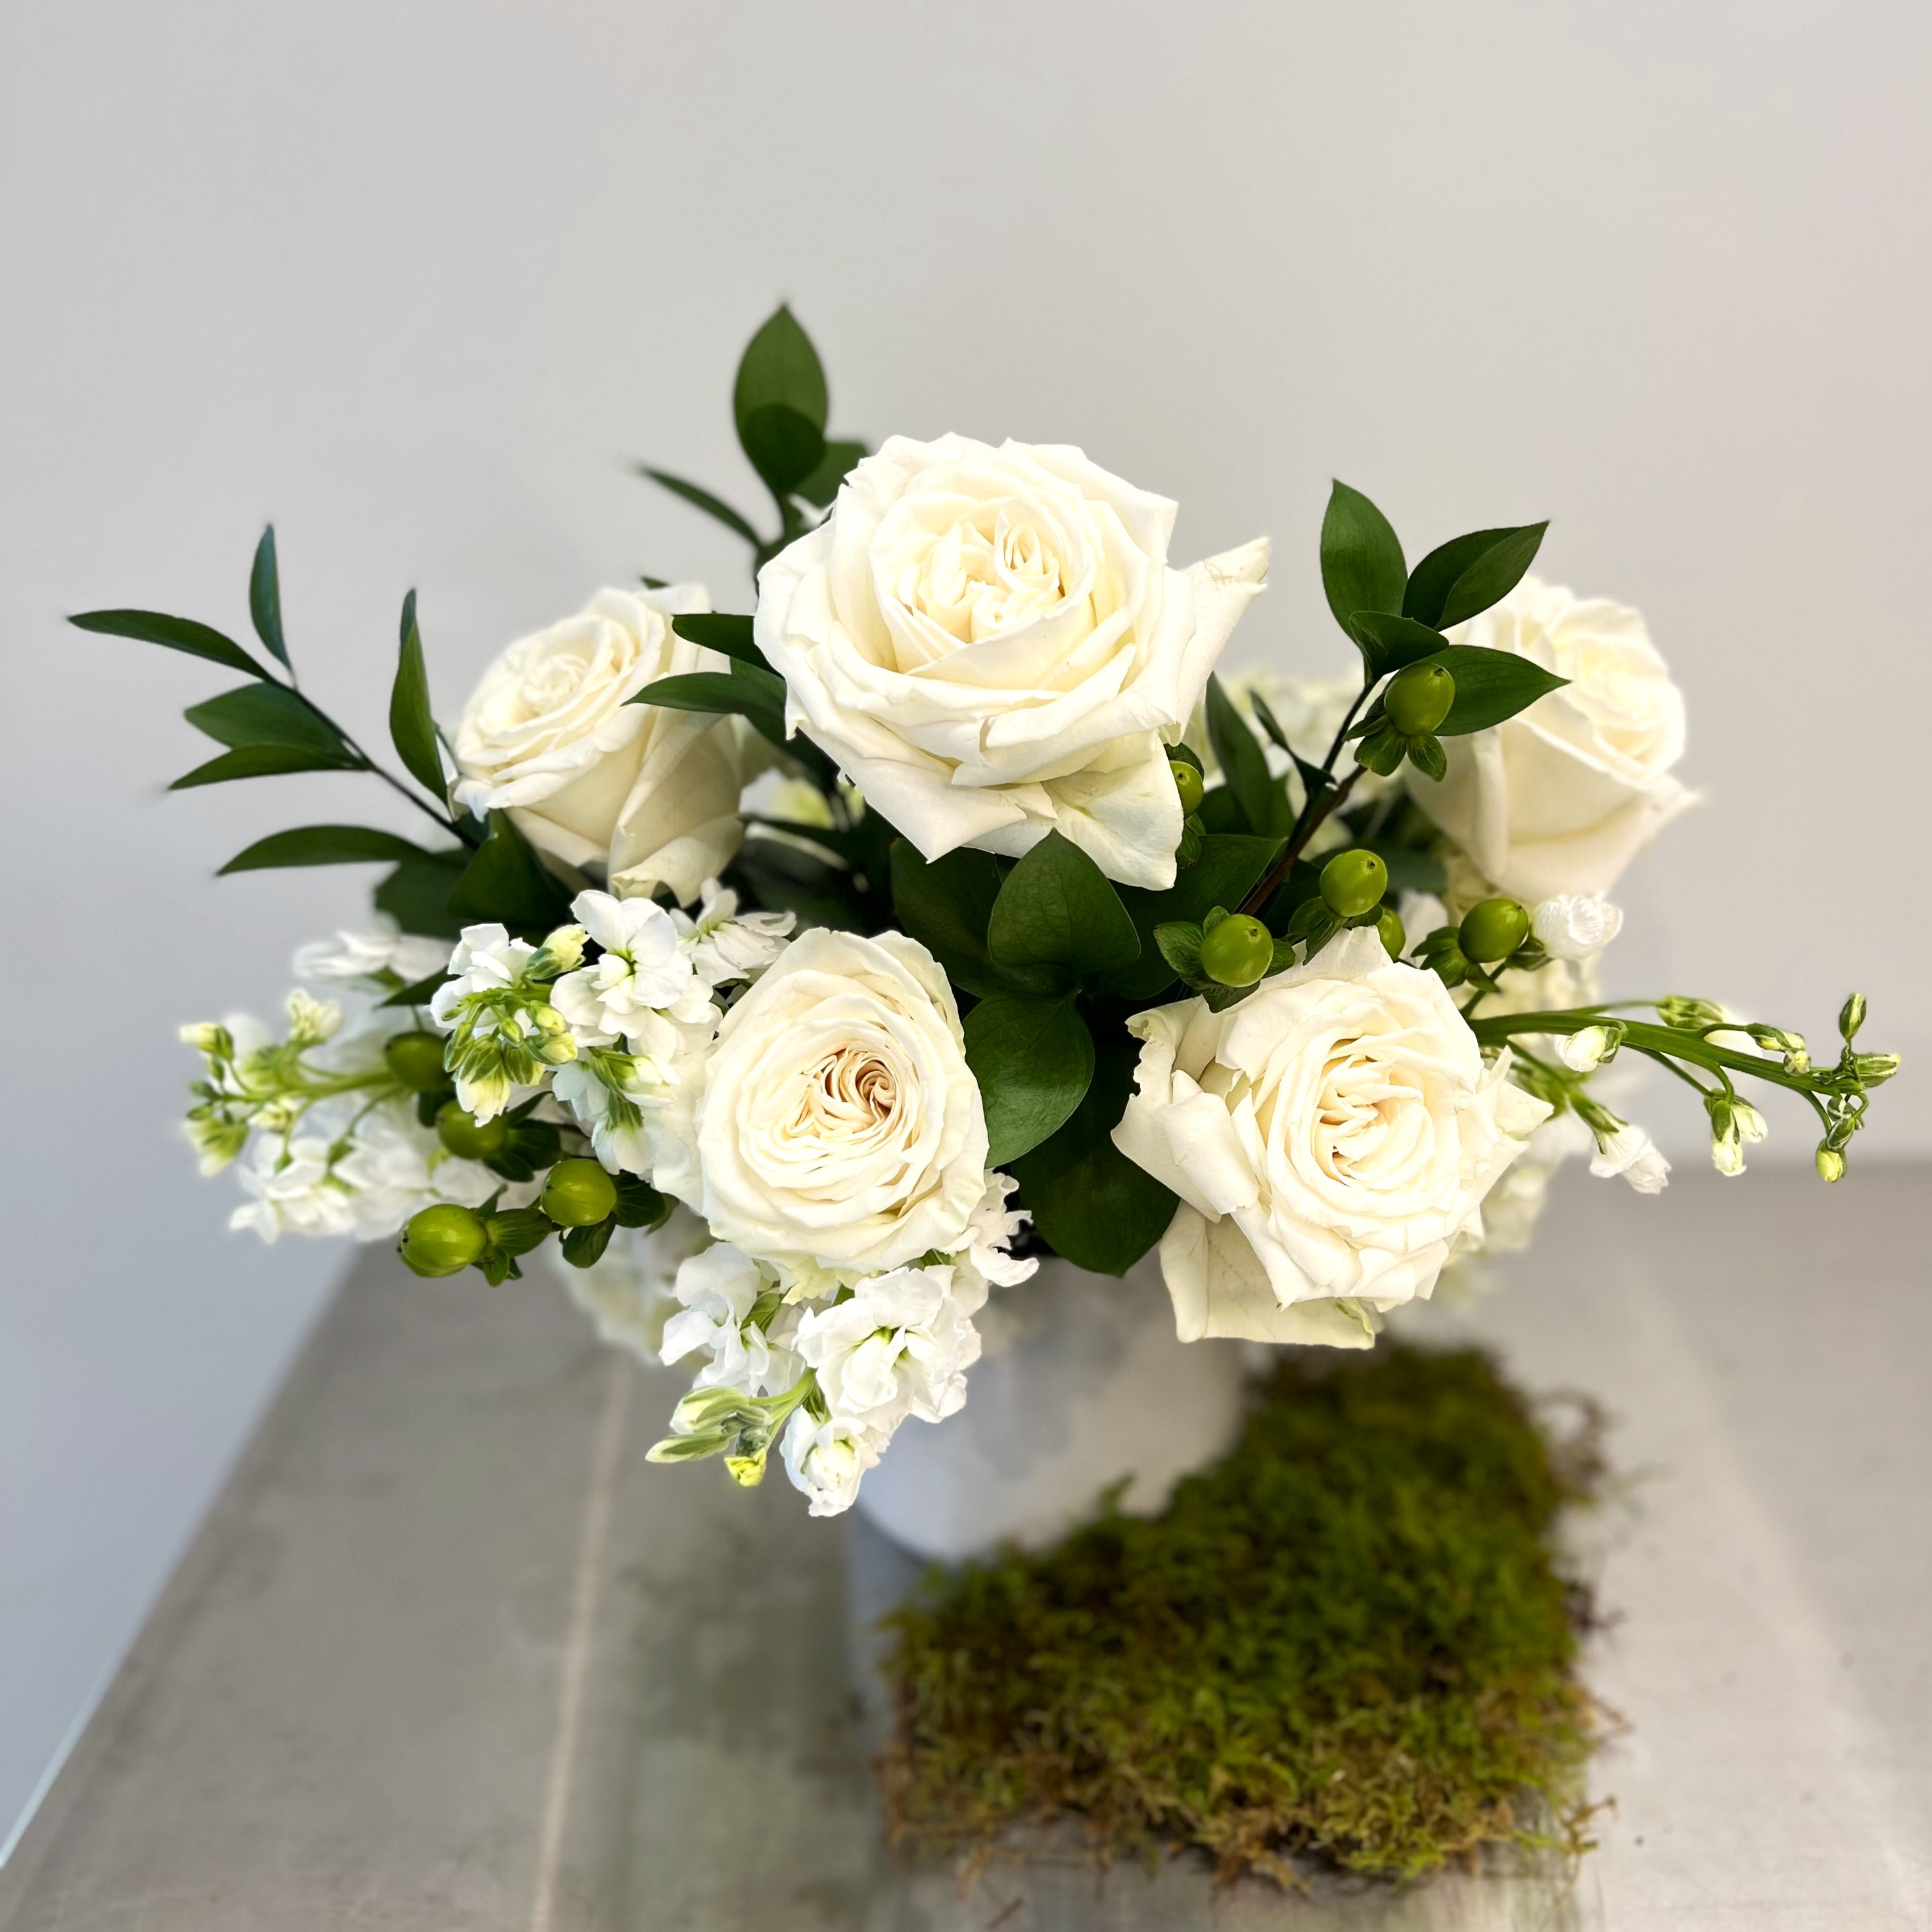 Bright White - Crisp and Clean - Perfect for a gift when you're not sure what else to do!  From the coffee table, to the kitchen island - this arrangement is one our favorites for sure.  White Hydrangea, White Garden Roses, fragrant Stock, Hypericum Berries, and assorted greenery.  Ranging in size from 10&quot; to 18&quot; based on price point.  Arranged in a white ceramic container.